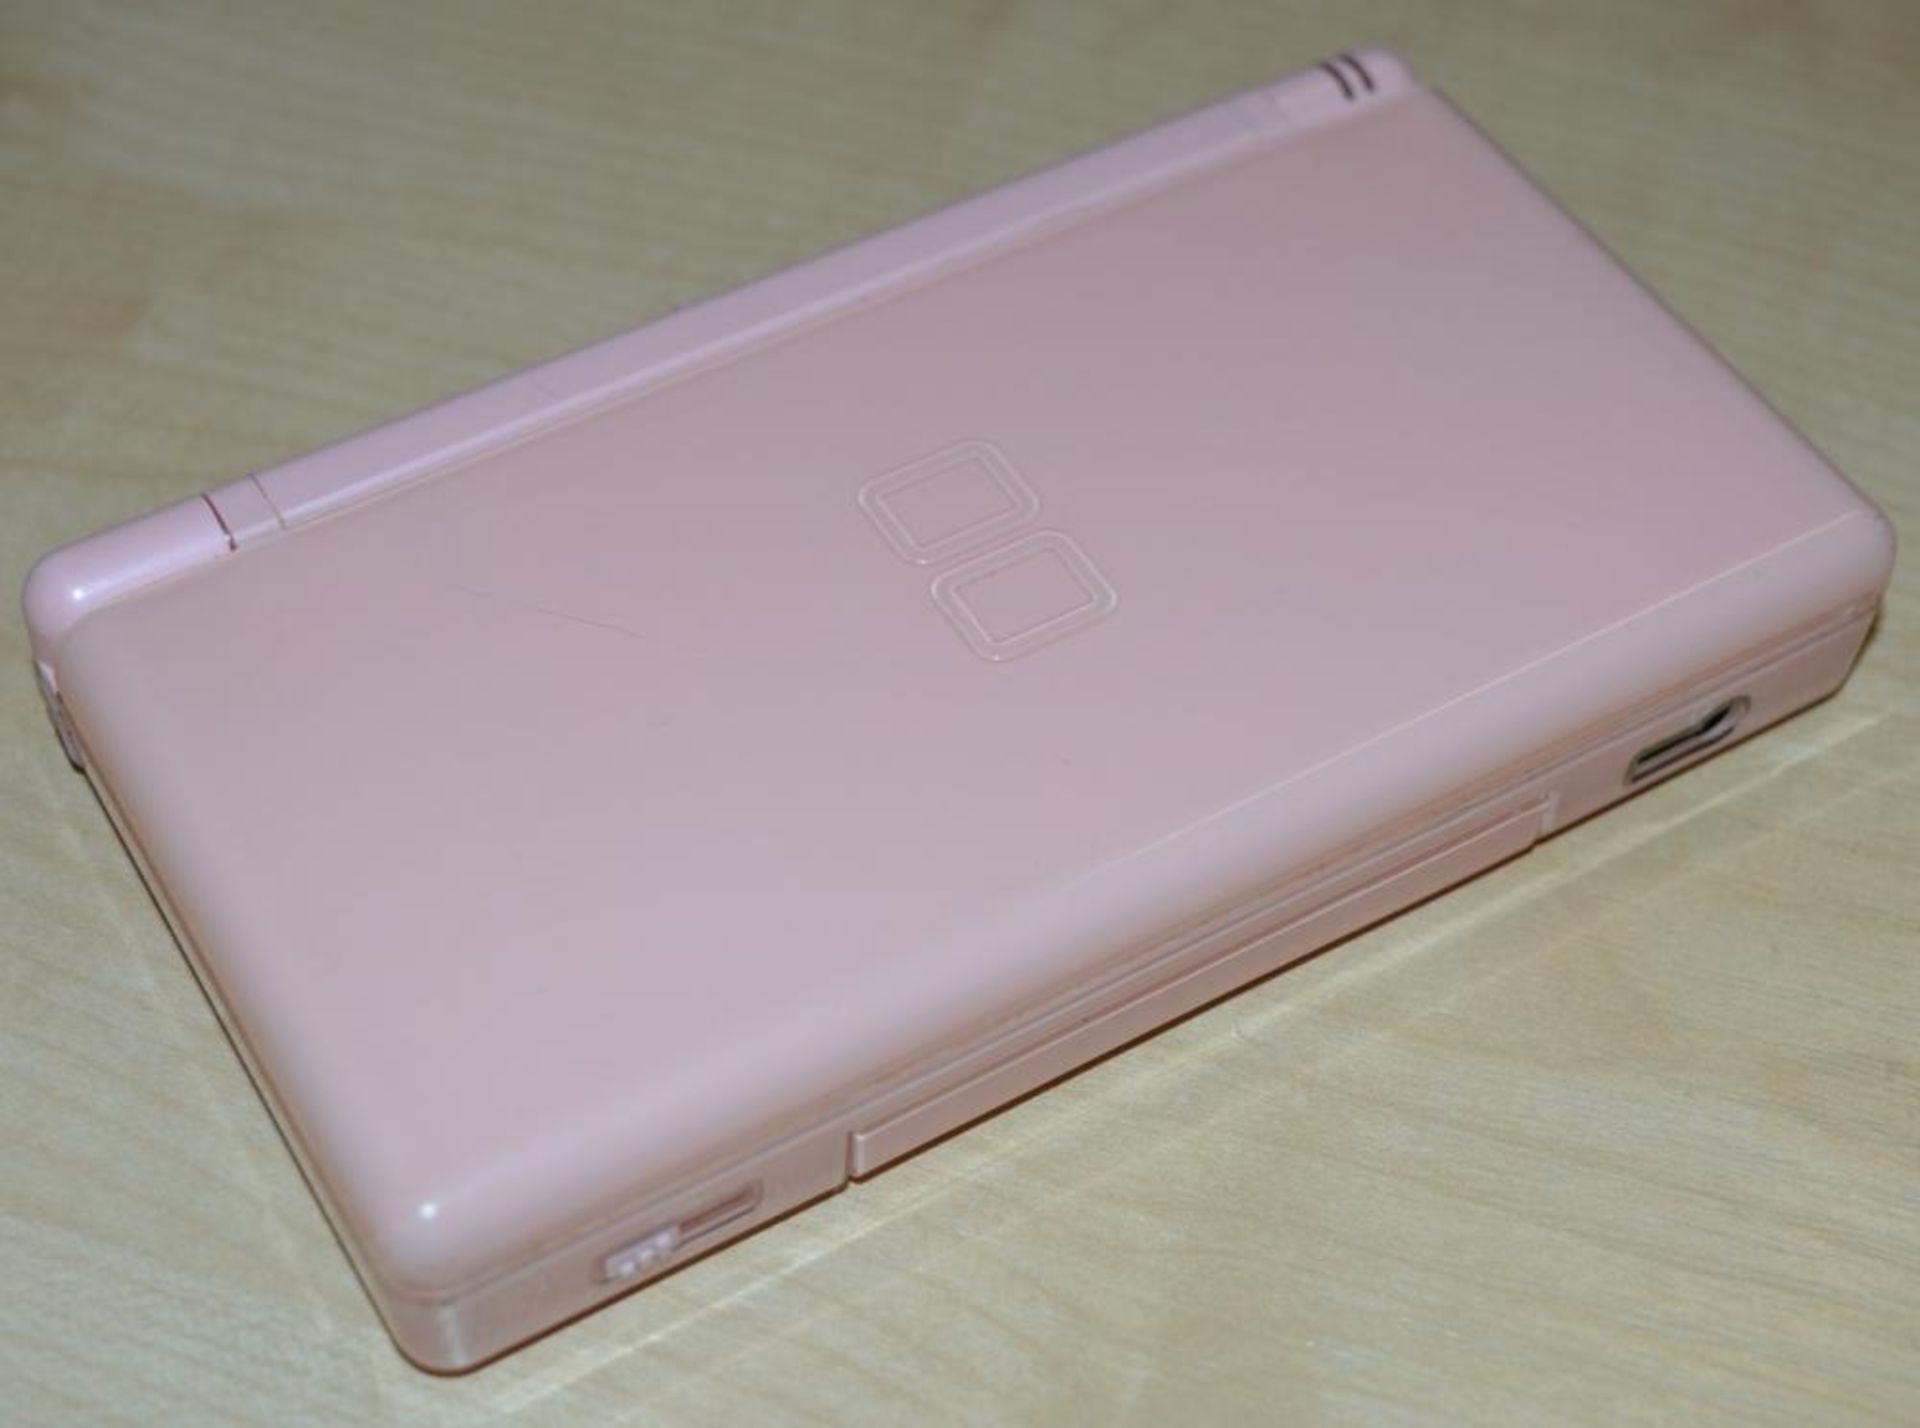 1 x Pink Nintendo DS Lite With High School Musical 2 Game - Includes Touch Pen and Charger - Good Co - Image 8 of 8